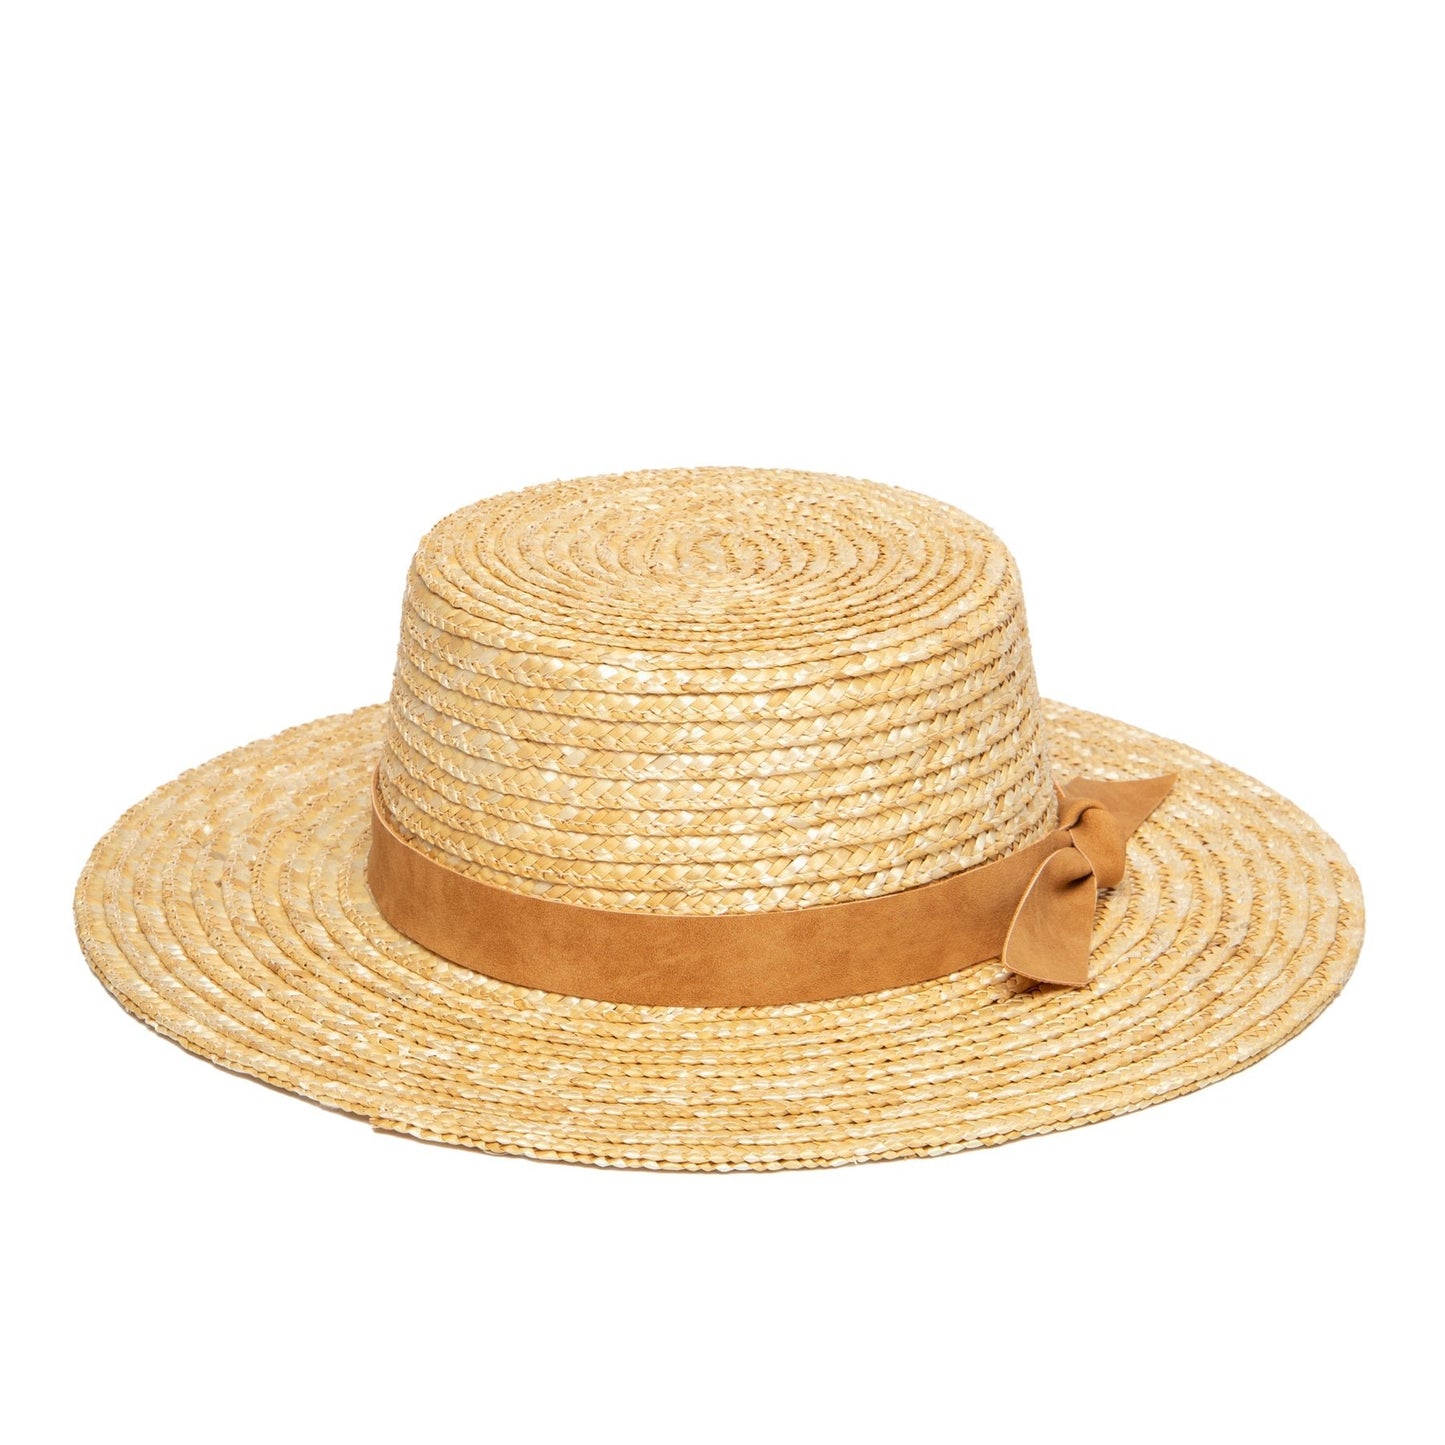 Wheat Straw Boater with faux band - The Riviera Towel Company